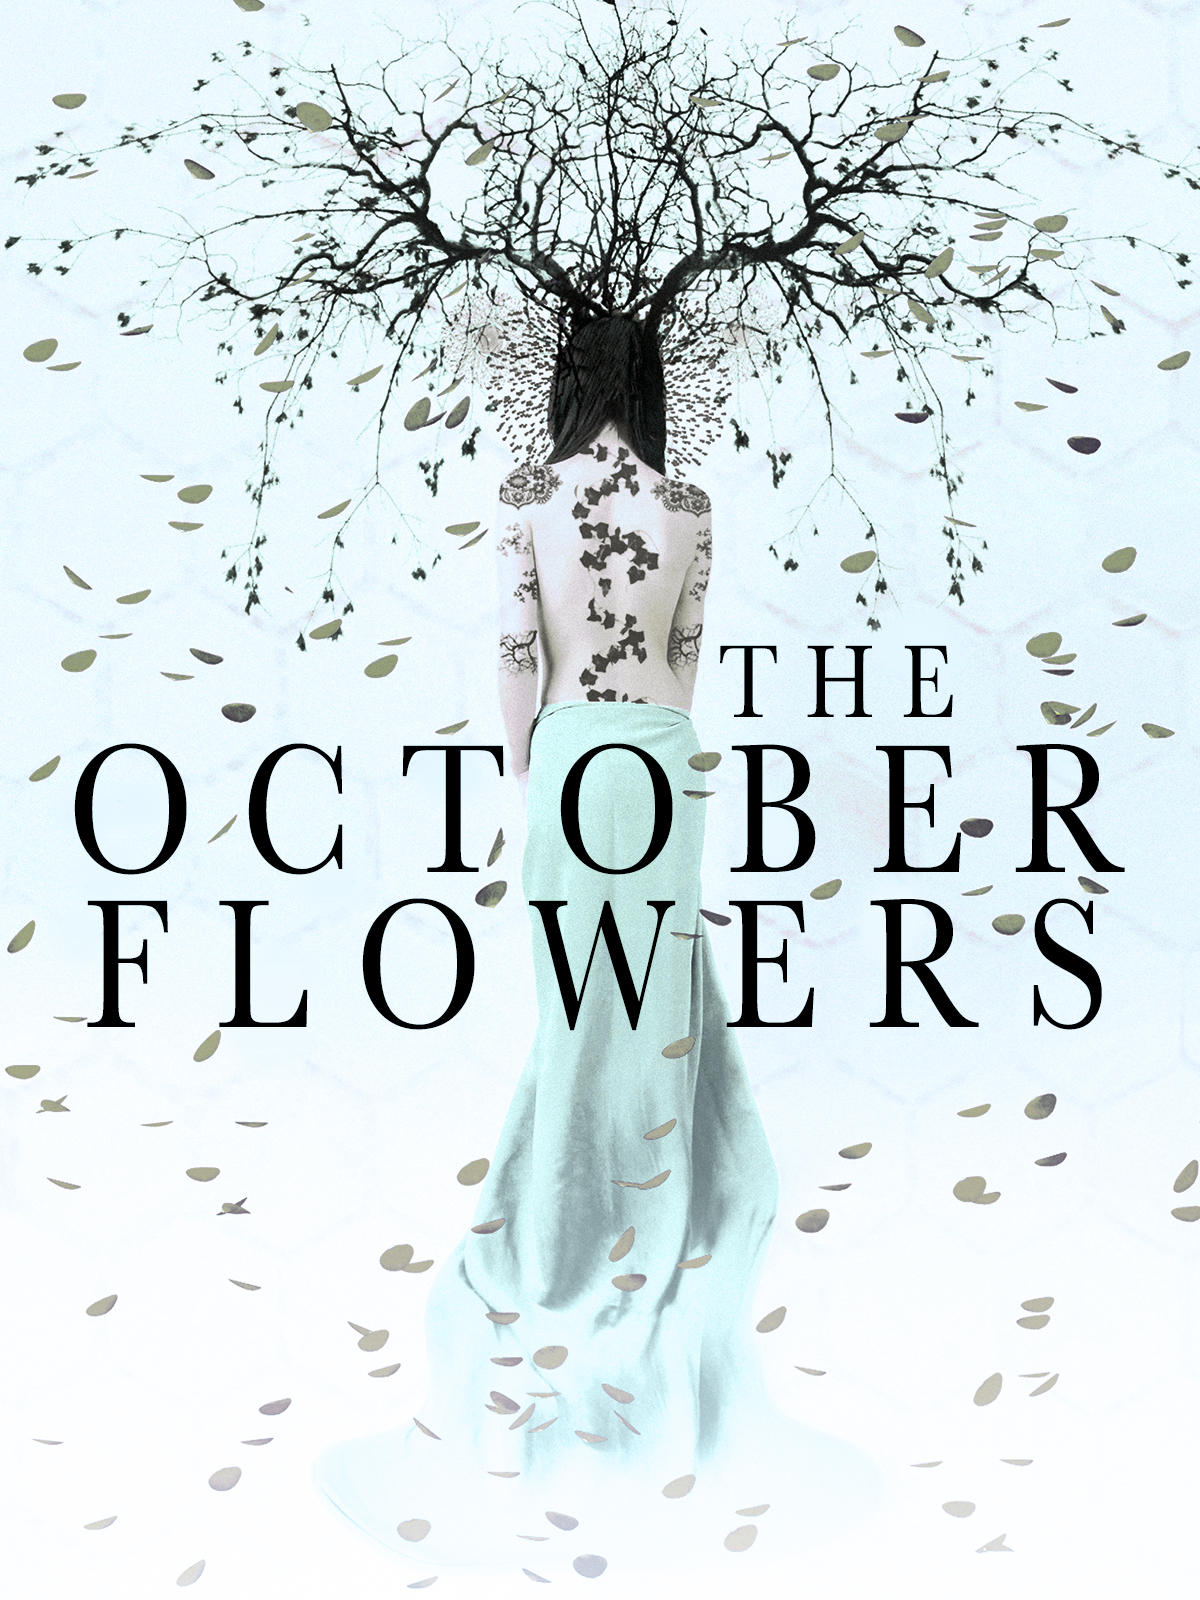 The October Flowers (2018)